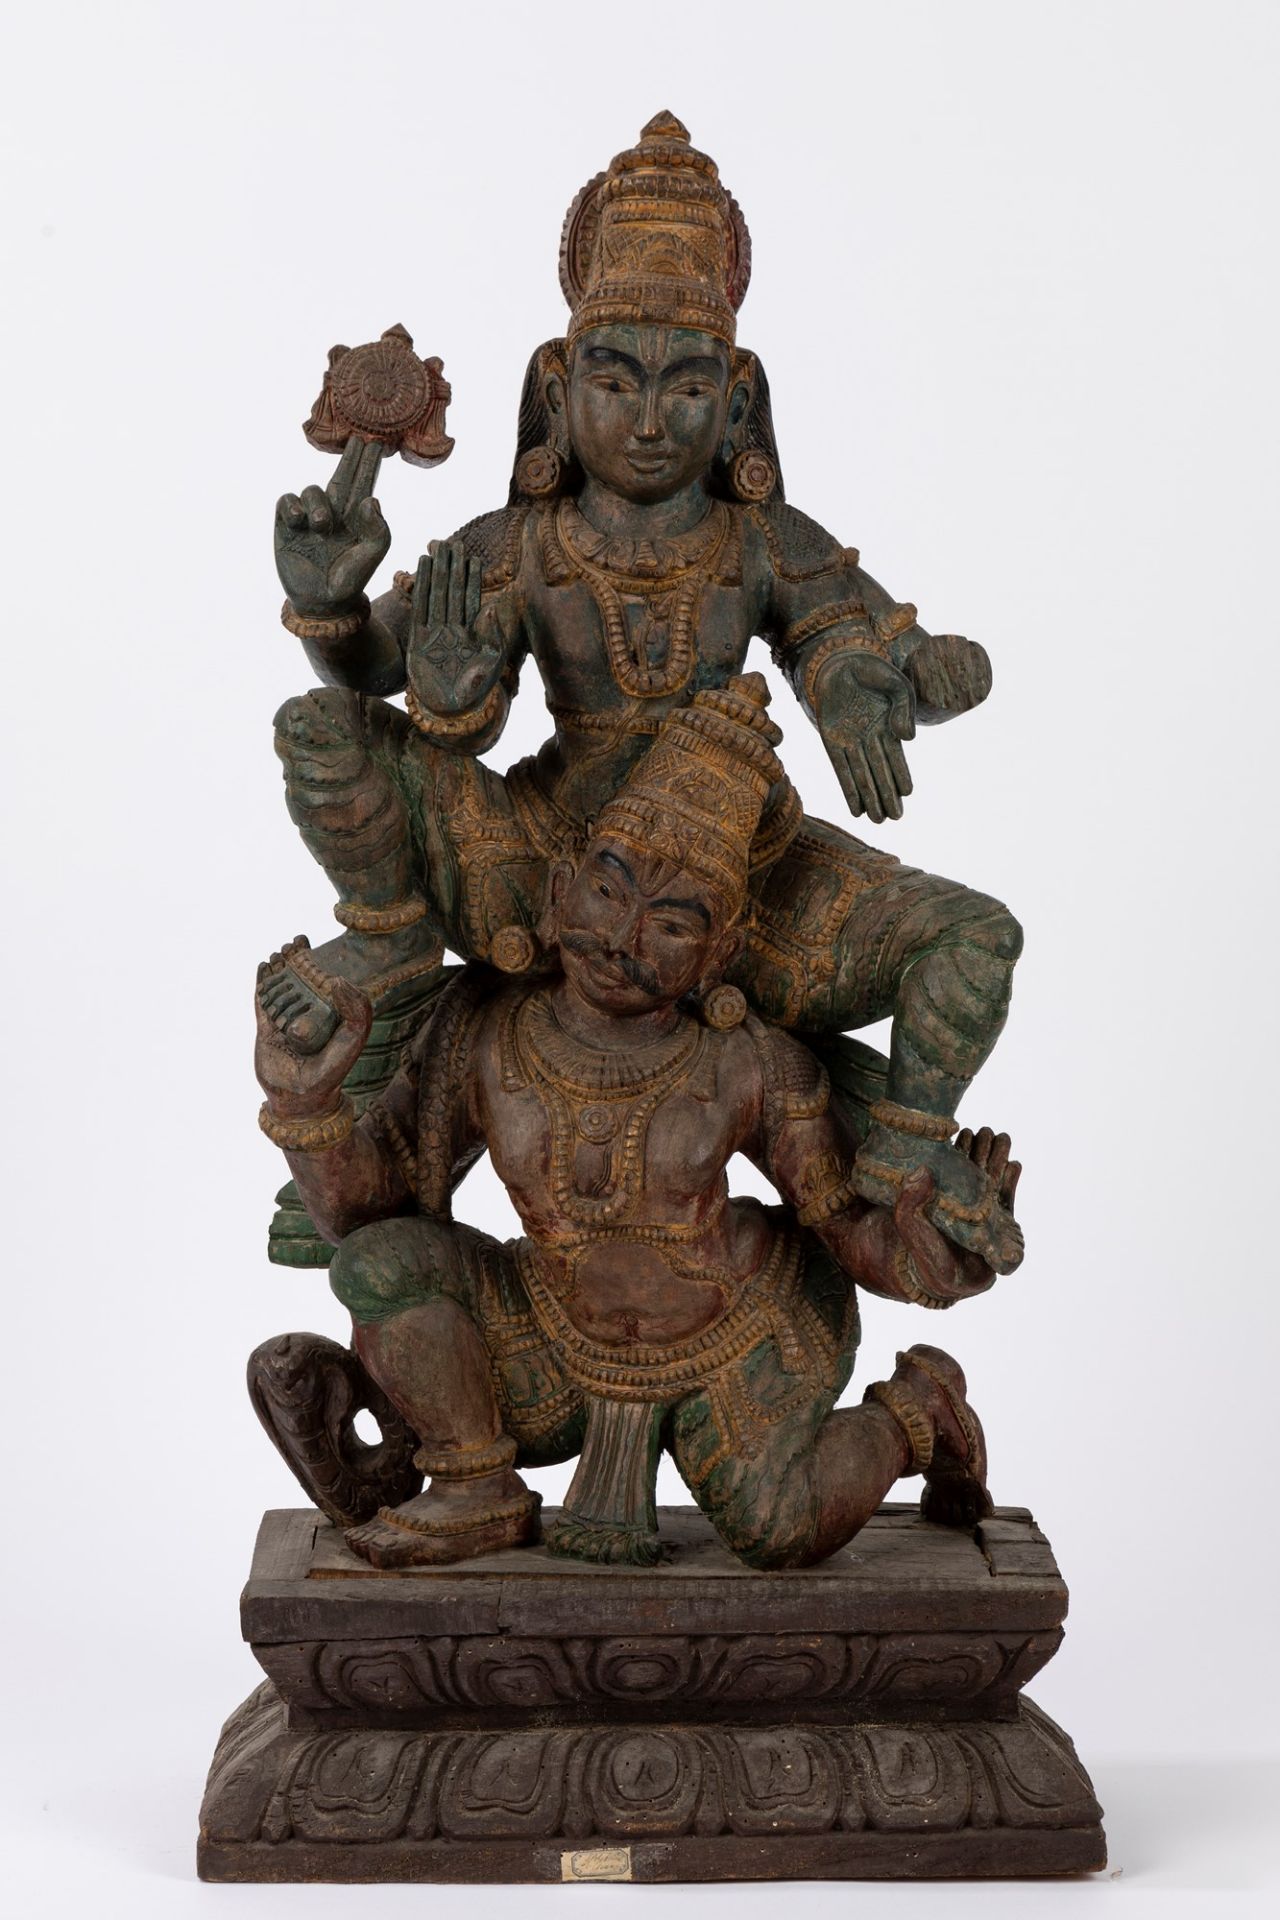 A polycrome wooden sculpture depicting Parvati and Shiva. 20th century